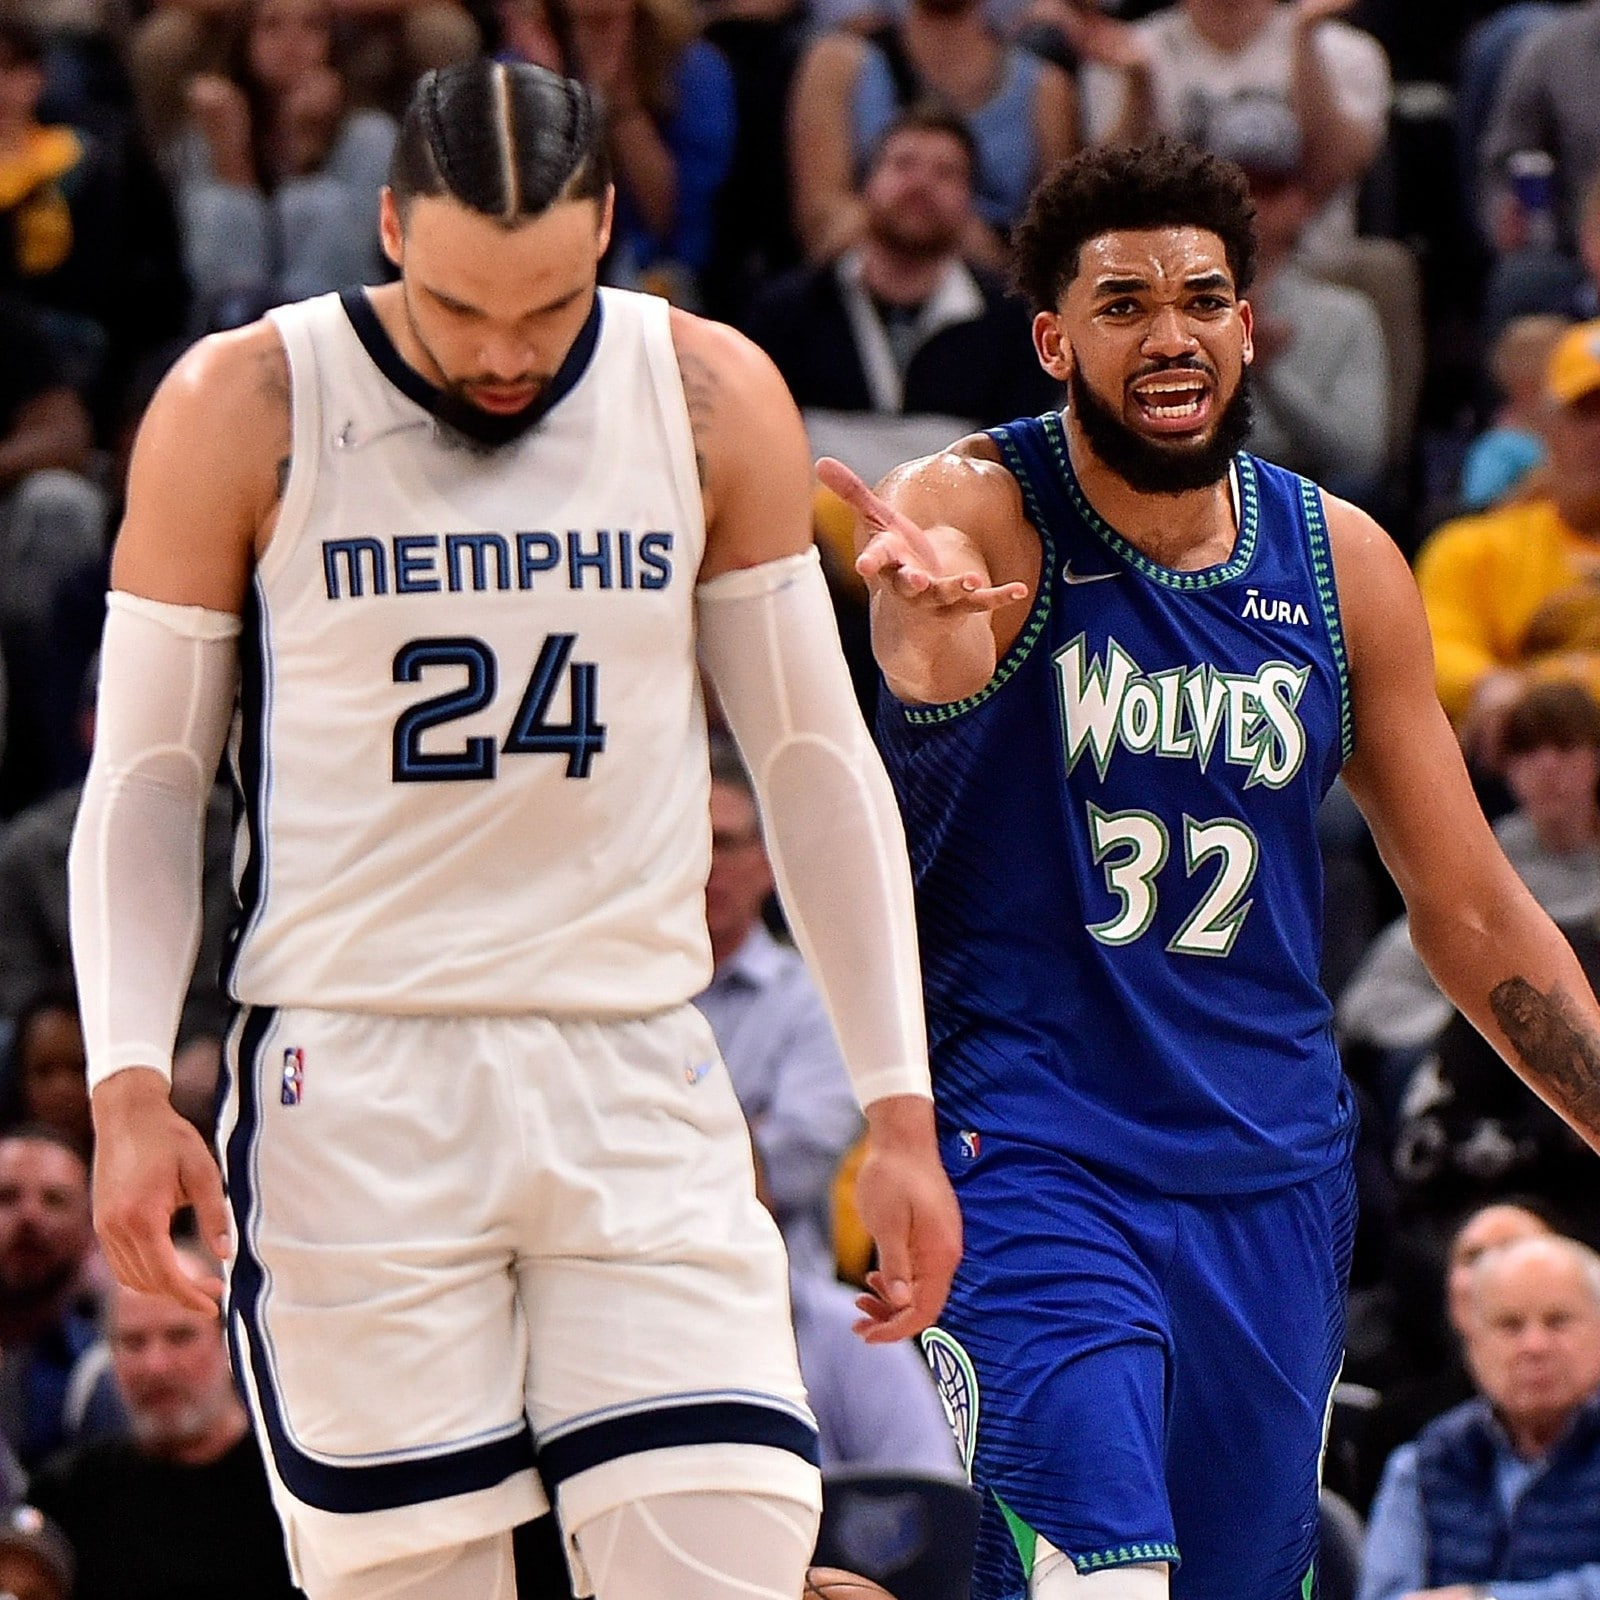 Memphis Grizzlies vs Minnesota Timberwolves Live Streaming When and Where to Watch NBA Live Coverage on Live TV Online